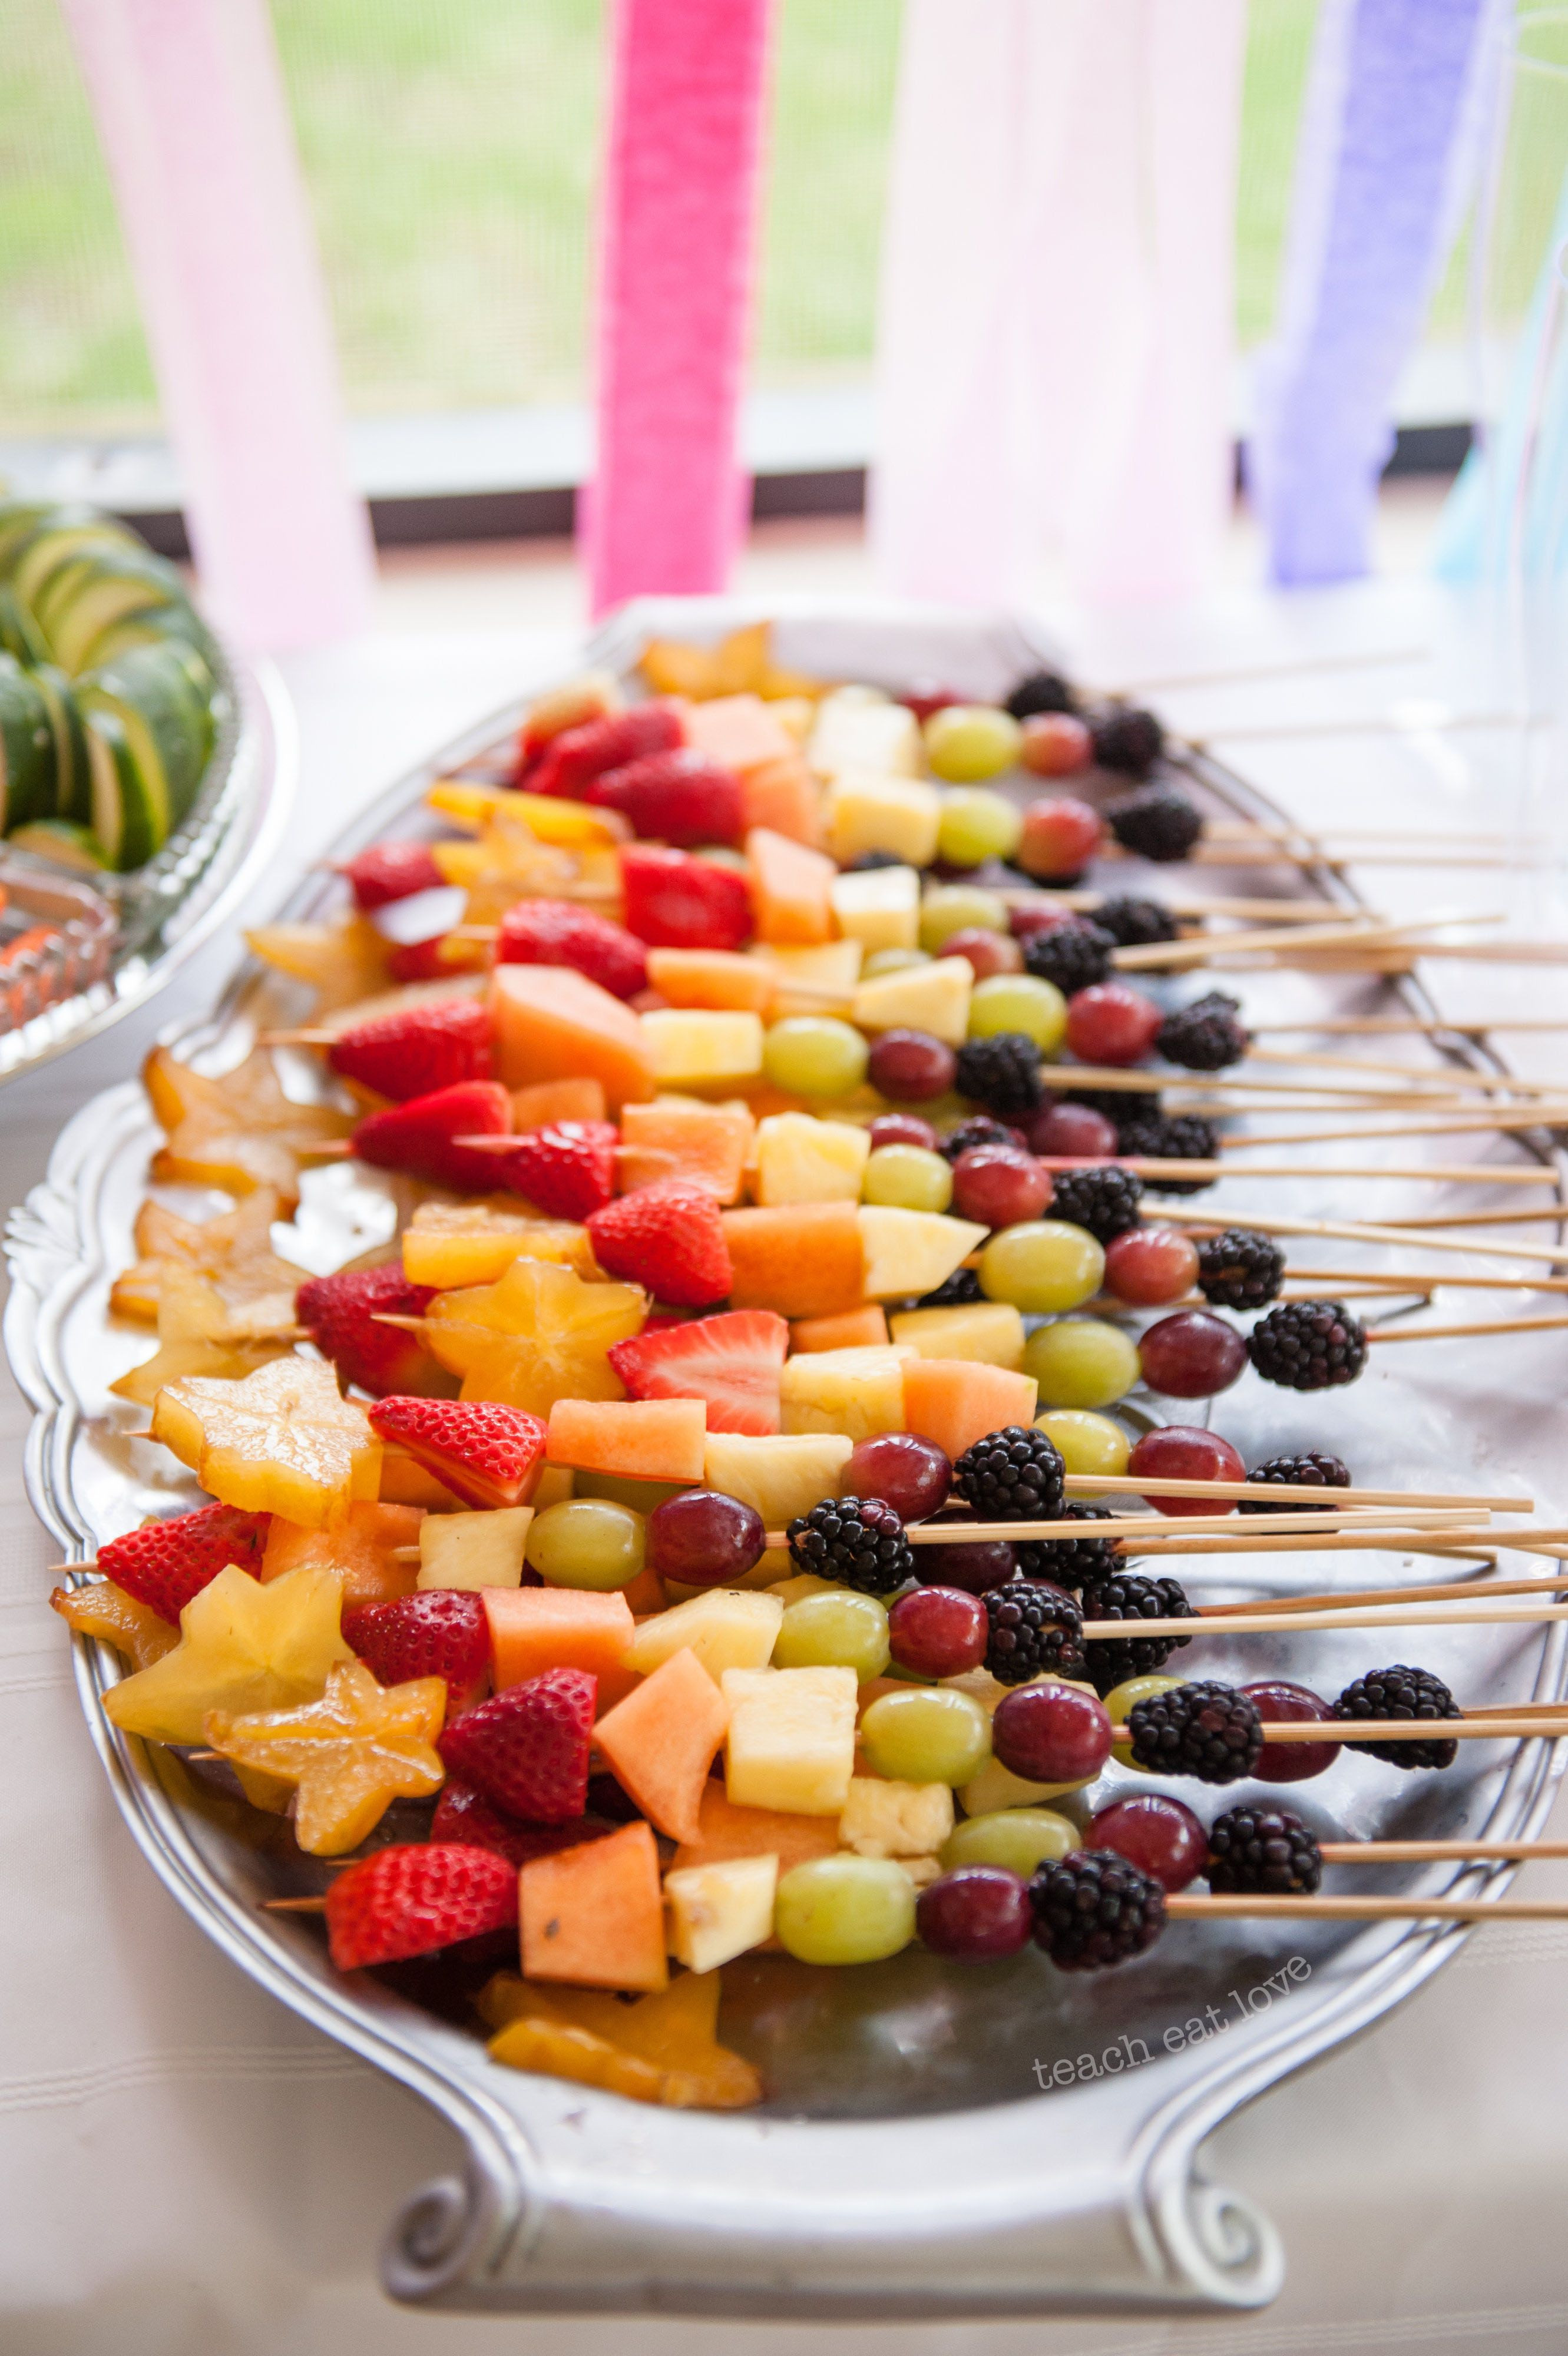 Anniversary Party Food Ideas
 The Baby’s First Birthday Recipe Round up and Fruit